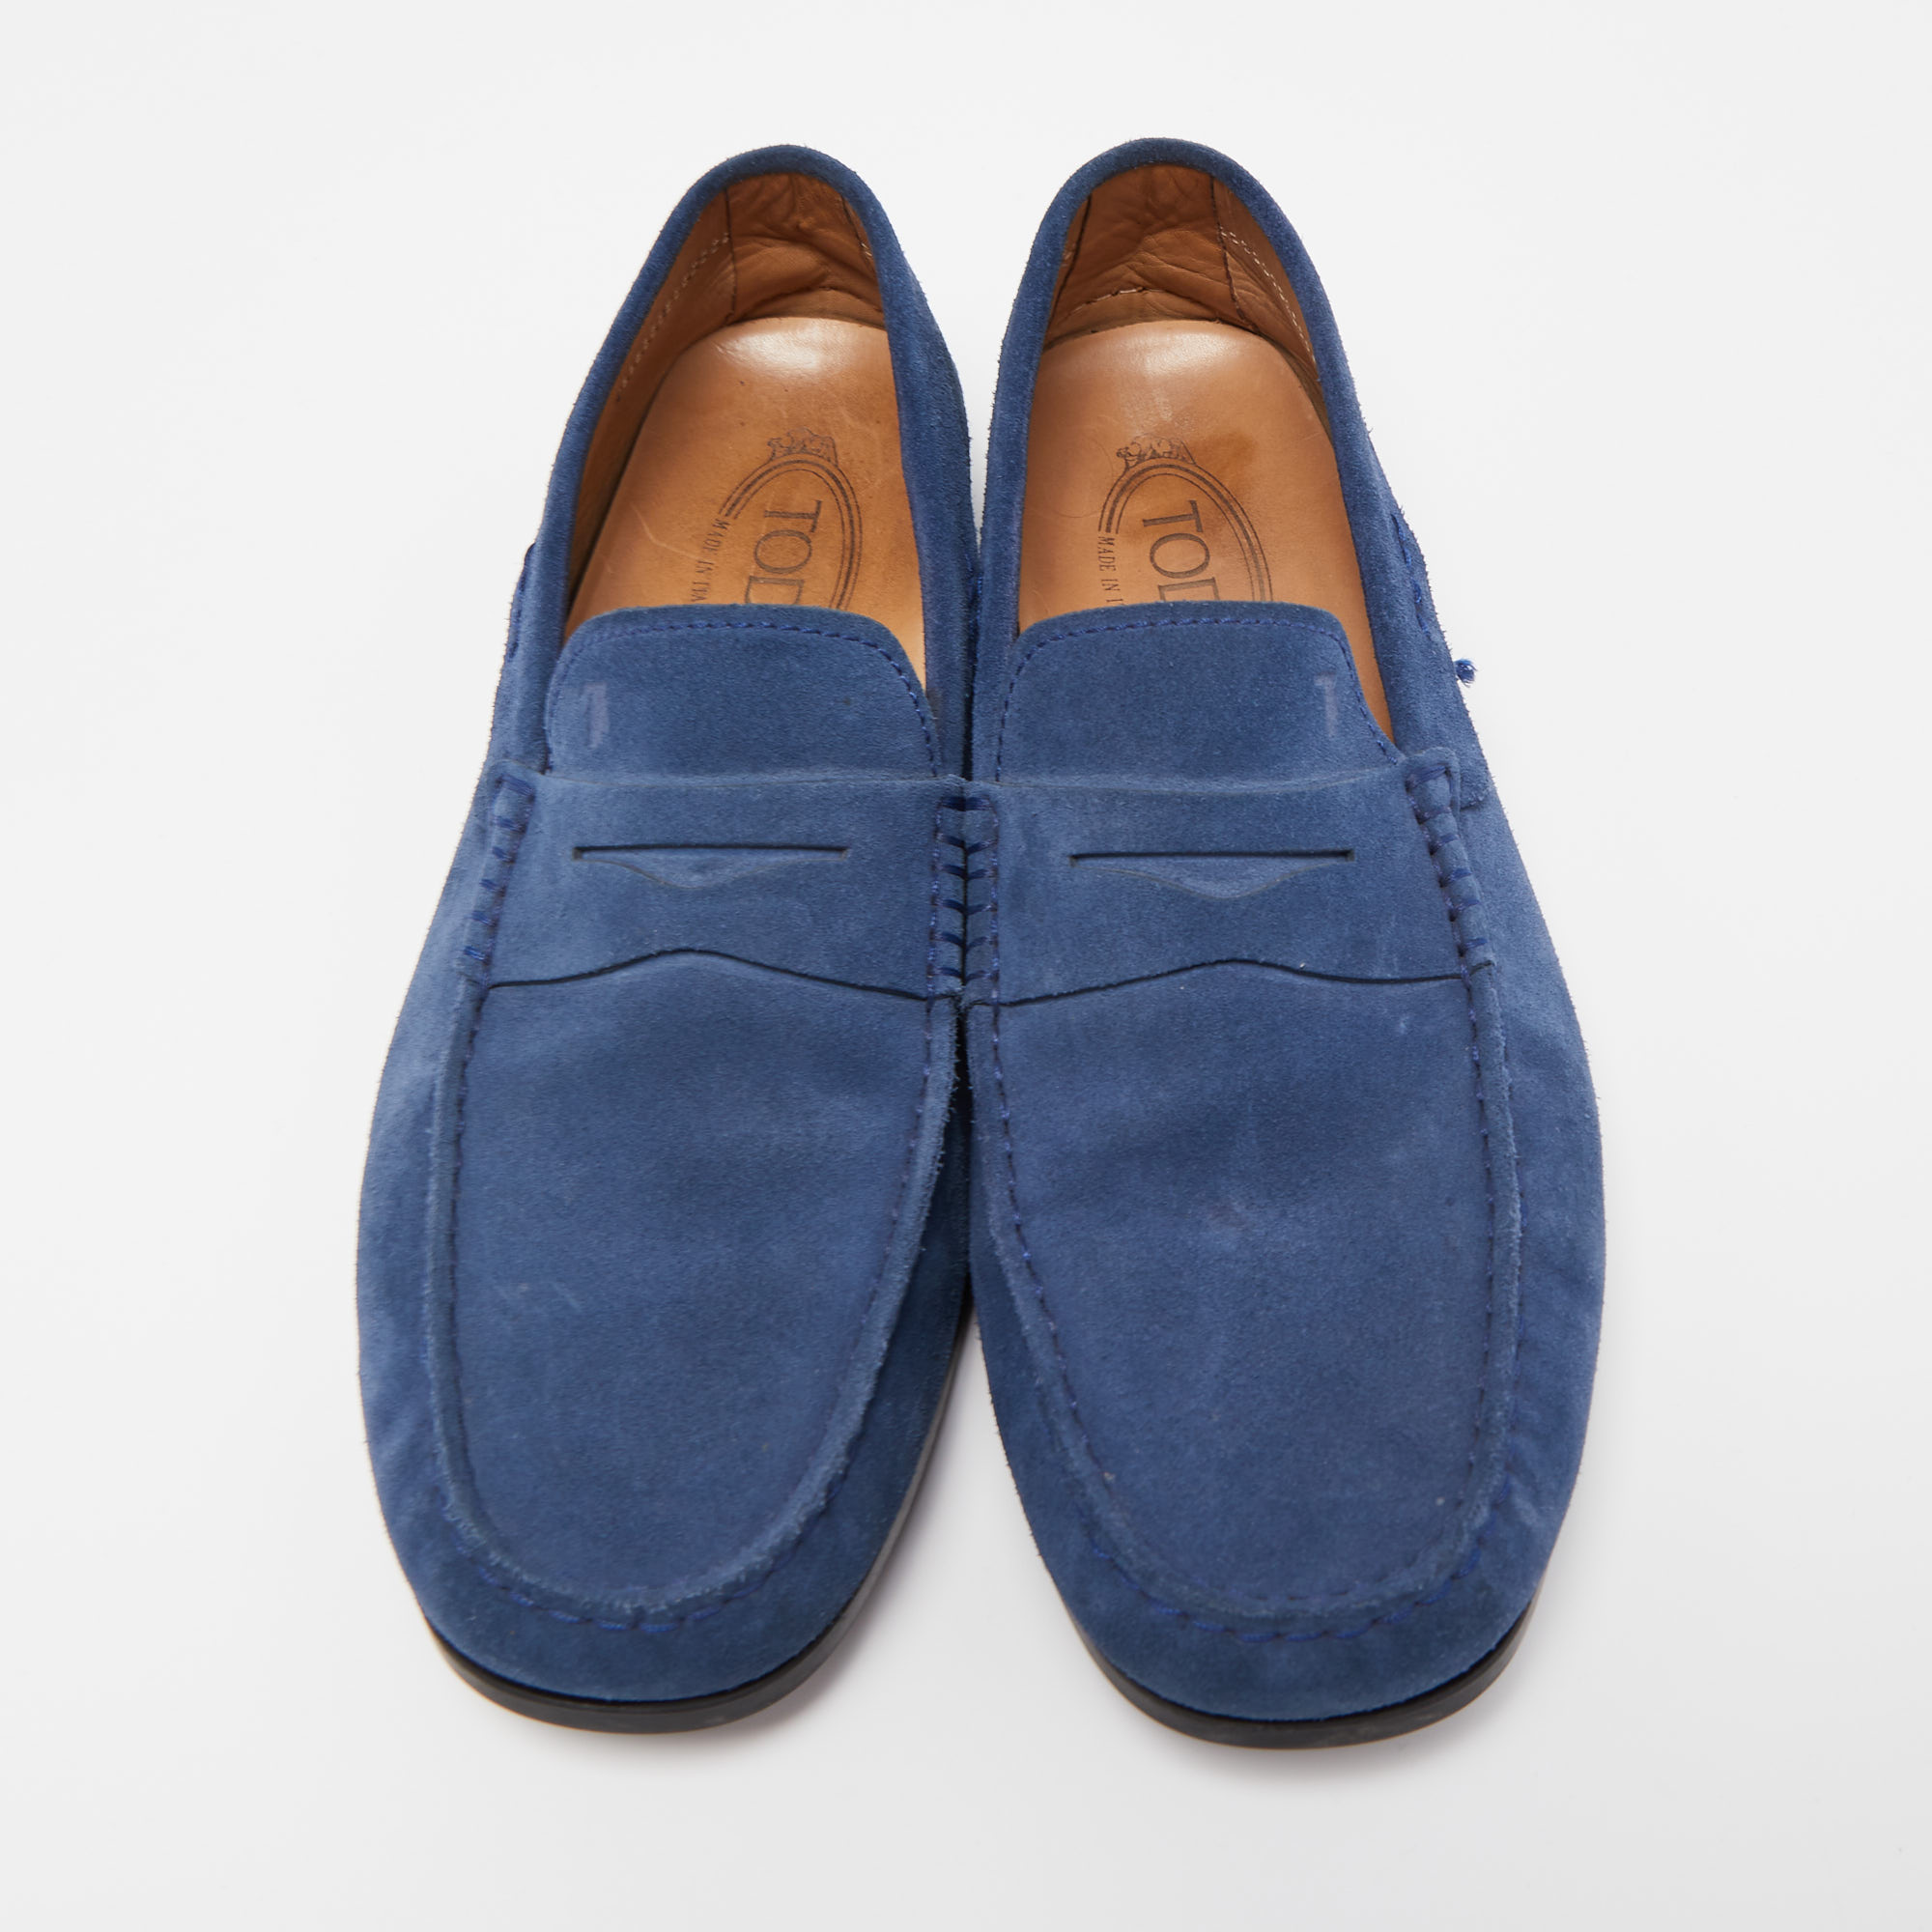 Tod's Blue Suede Penny Loafers Size 41